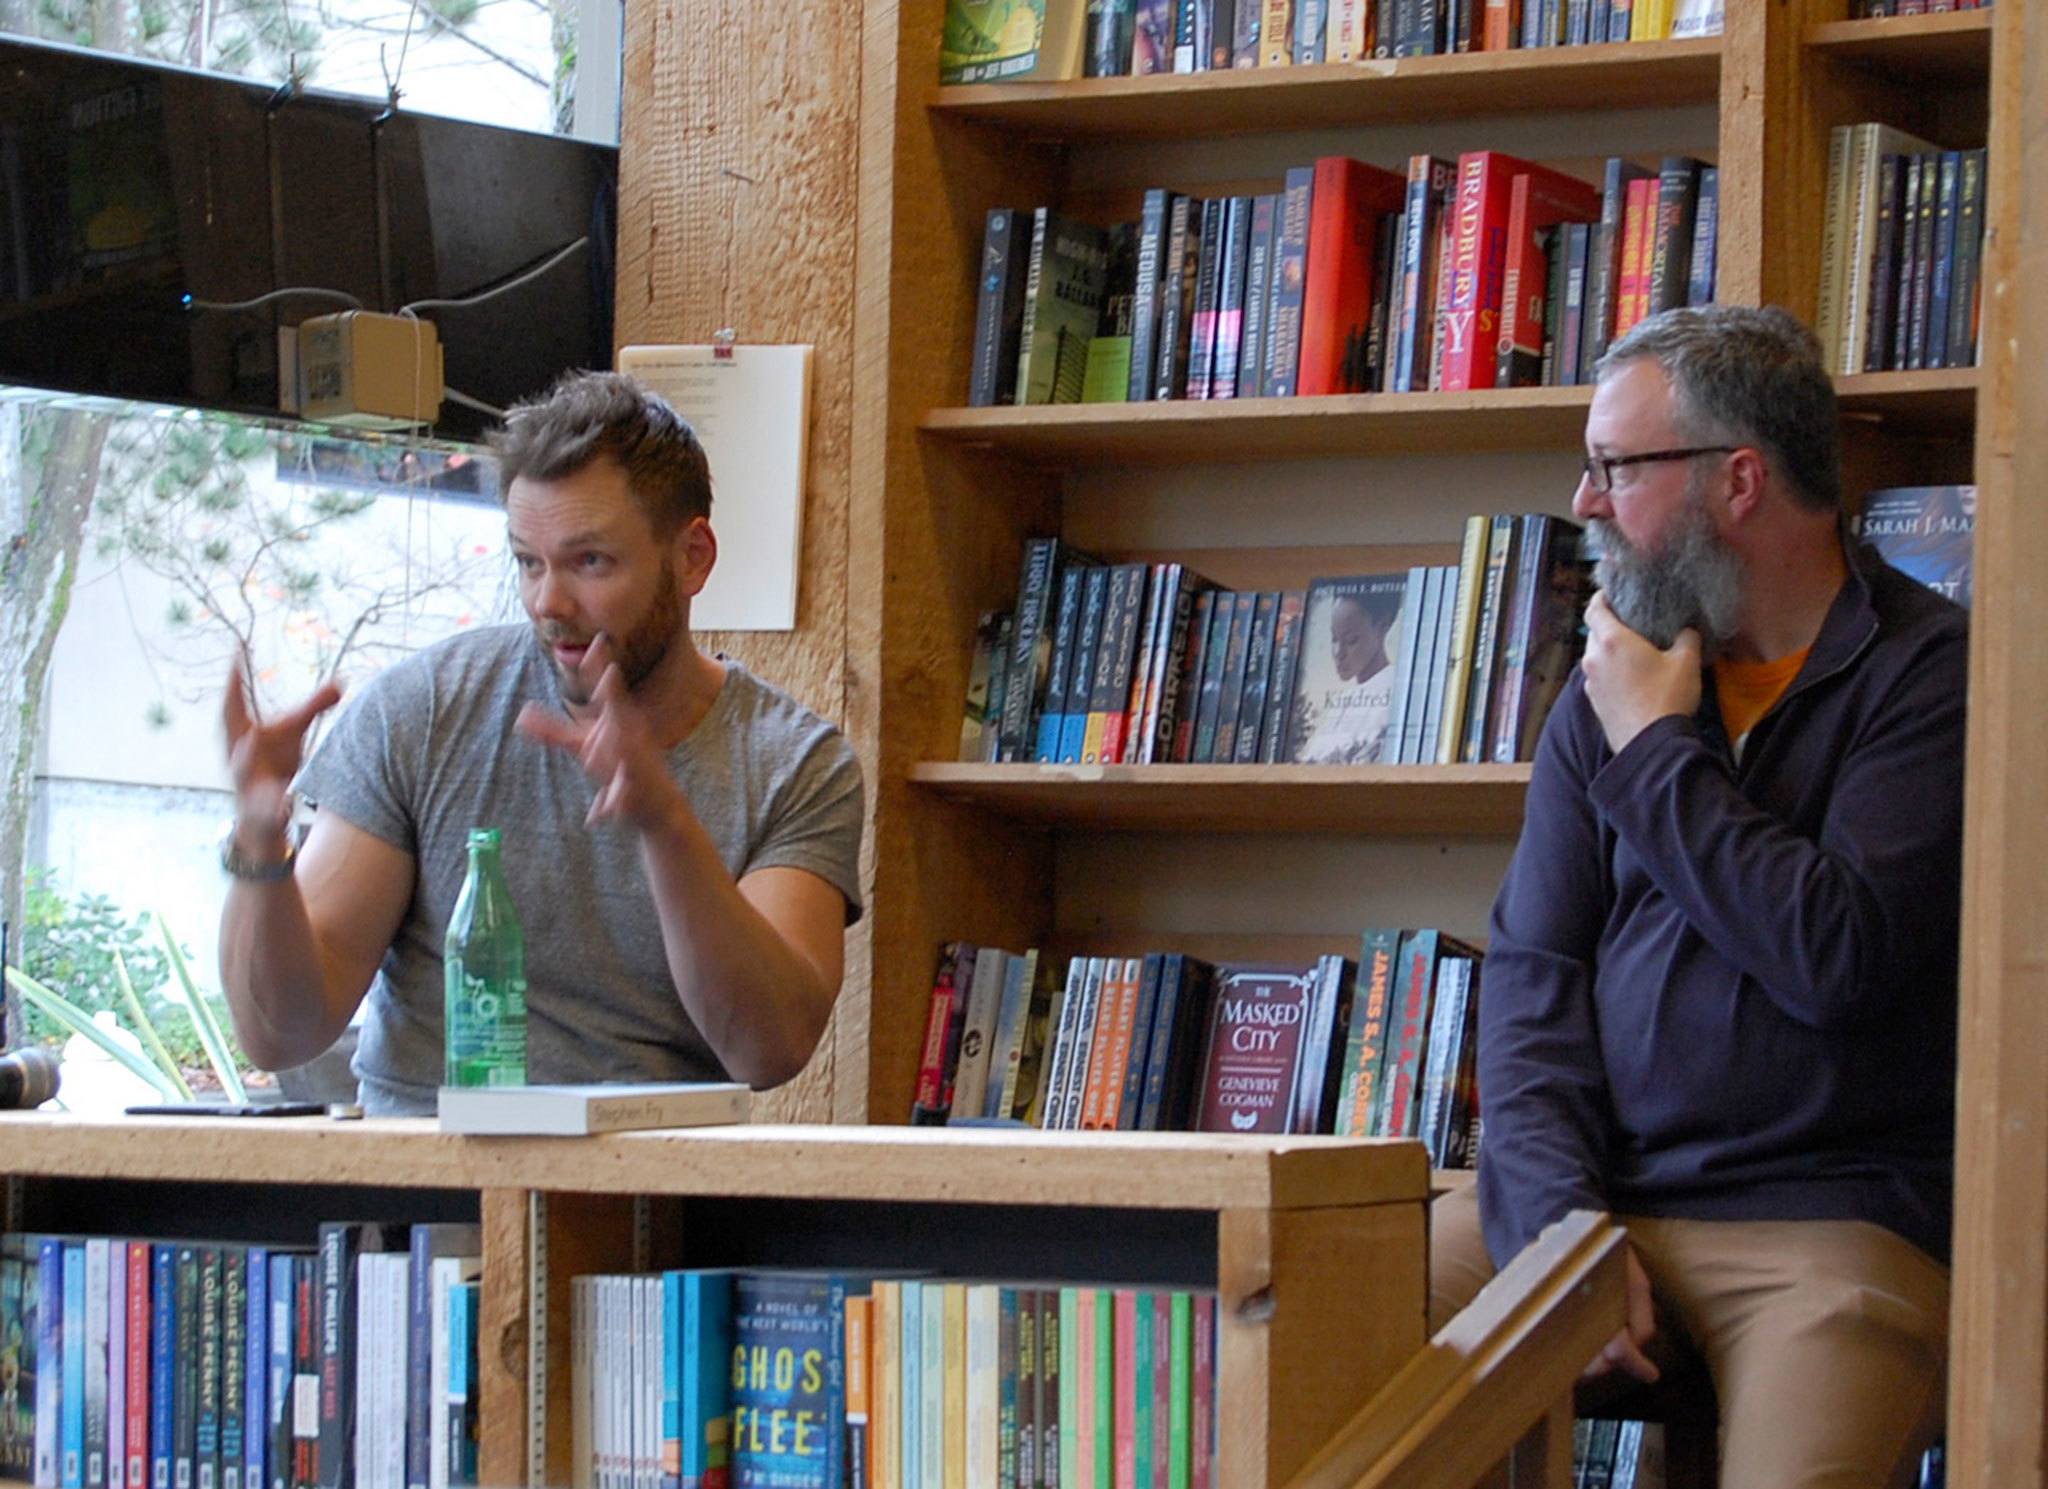 Joel McHale discusses his book, growing up on the Island and other topics with James Crossley at Island Books. Katie Metzger/staff photo